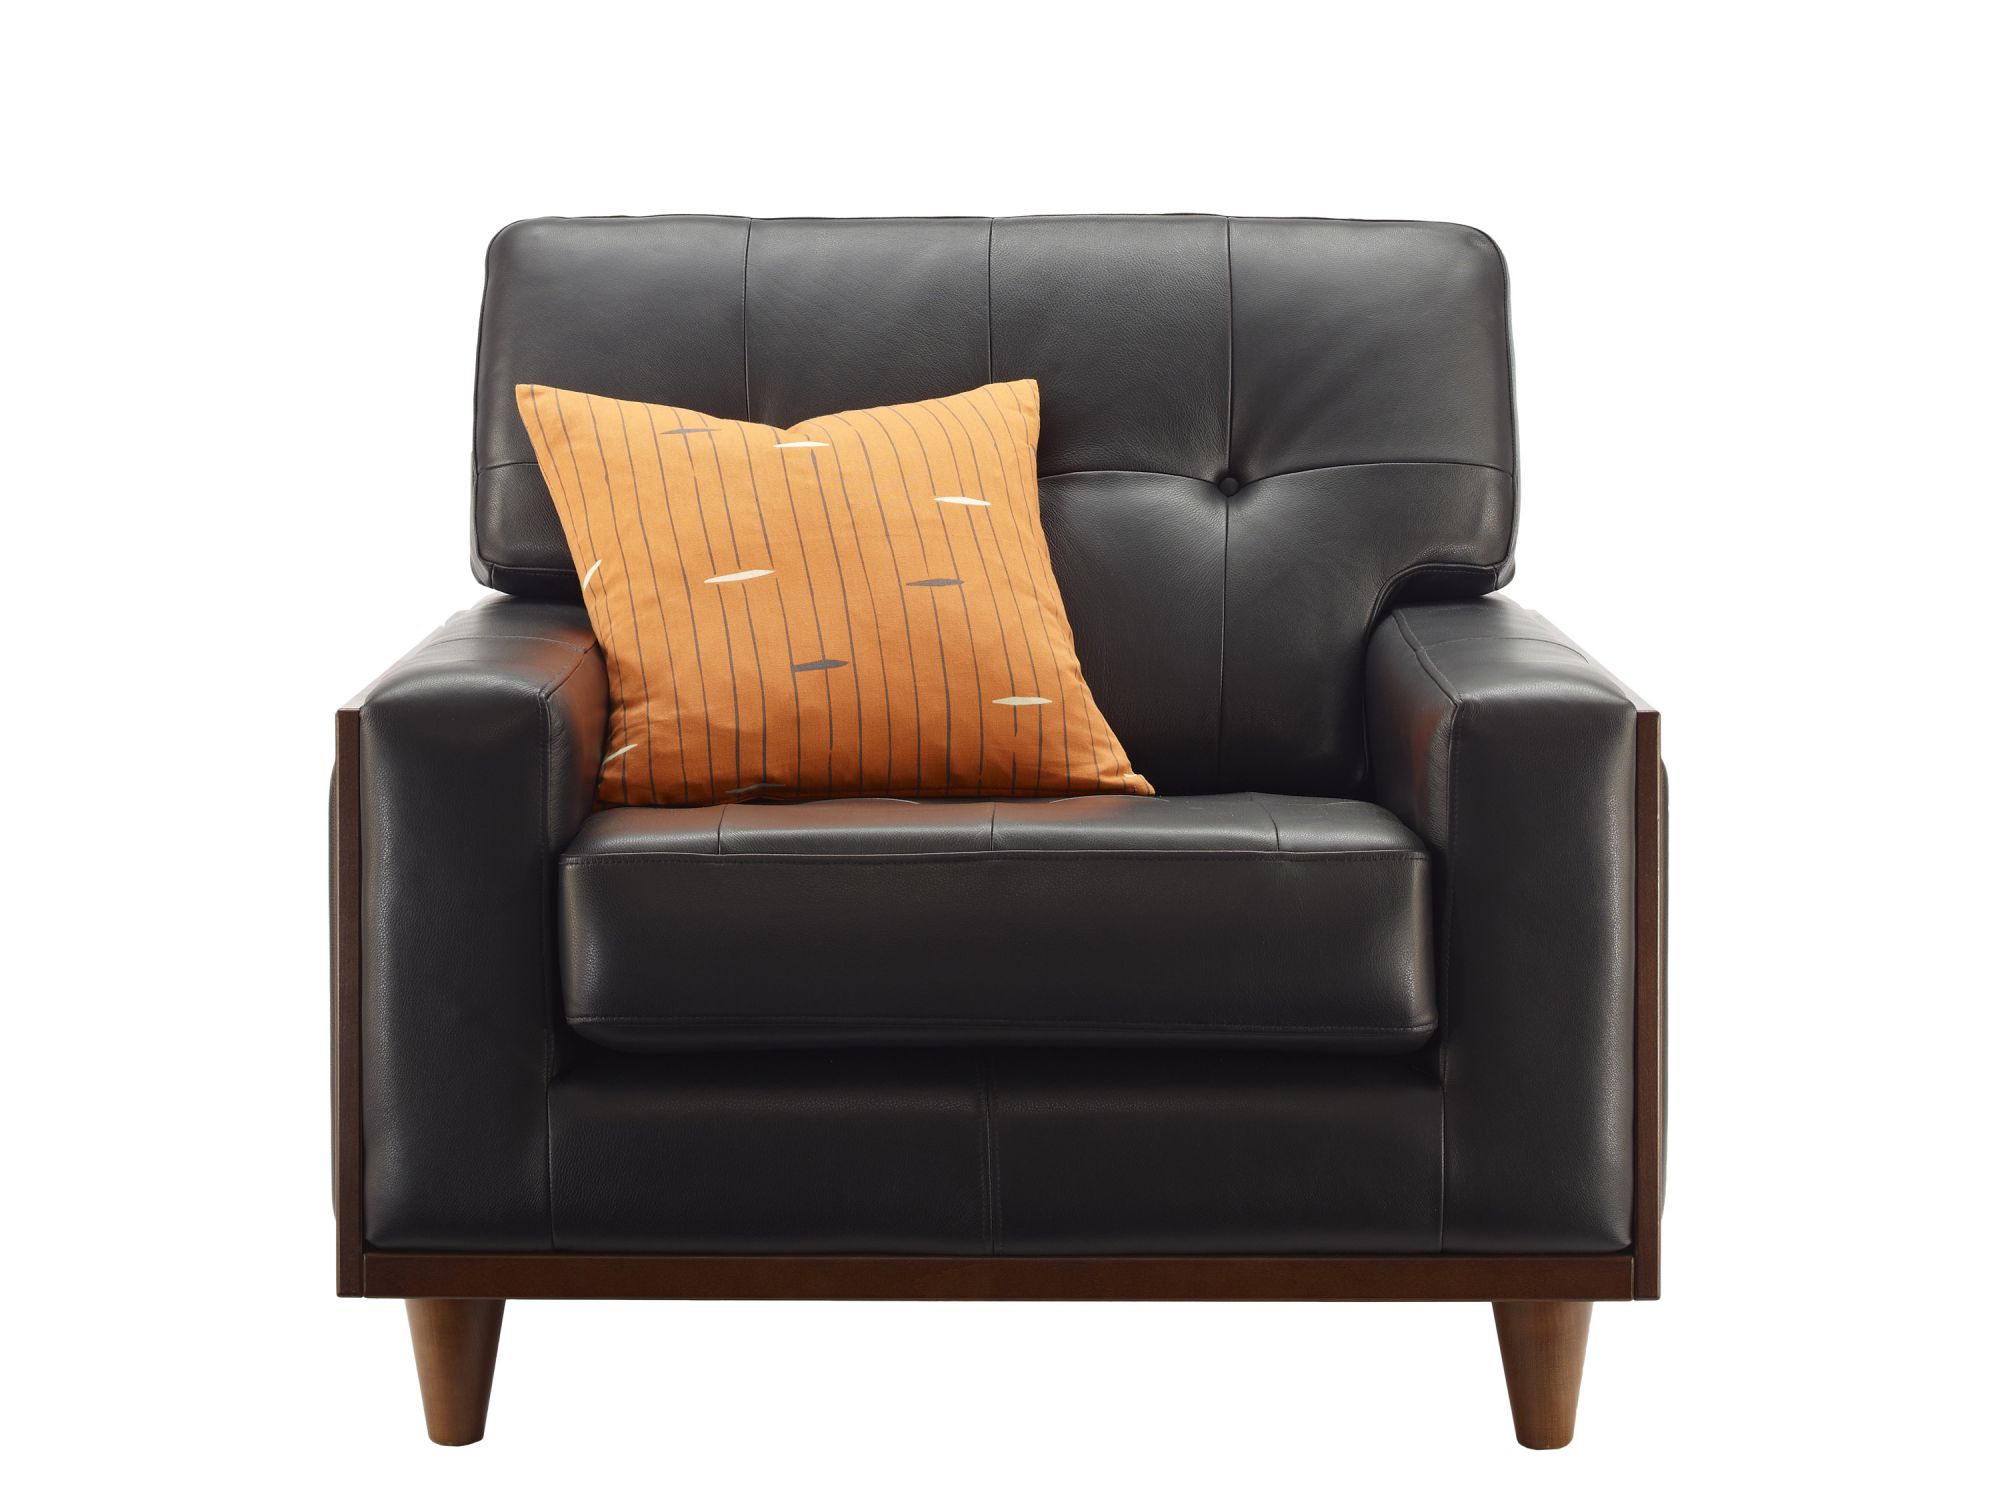 G Plan Vintage The Fifty Nine Leather Armchair in Capri Black with scatter